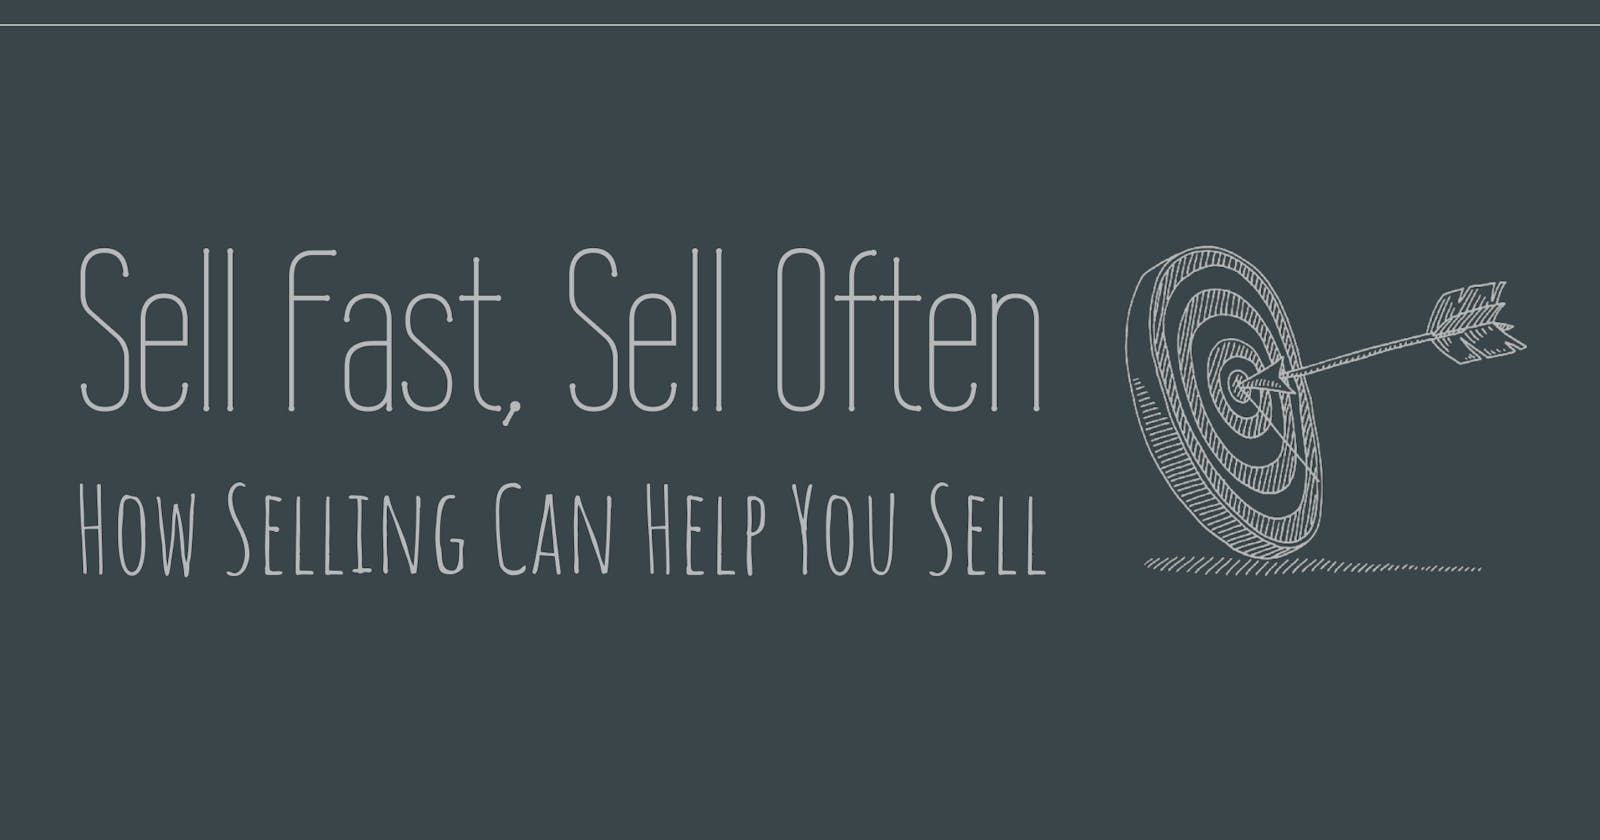 Sell Fast, Sell Often: How Selling Can Help You Sell